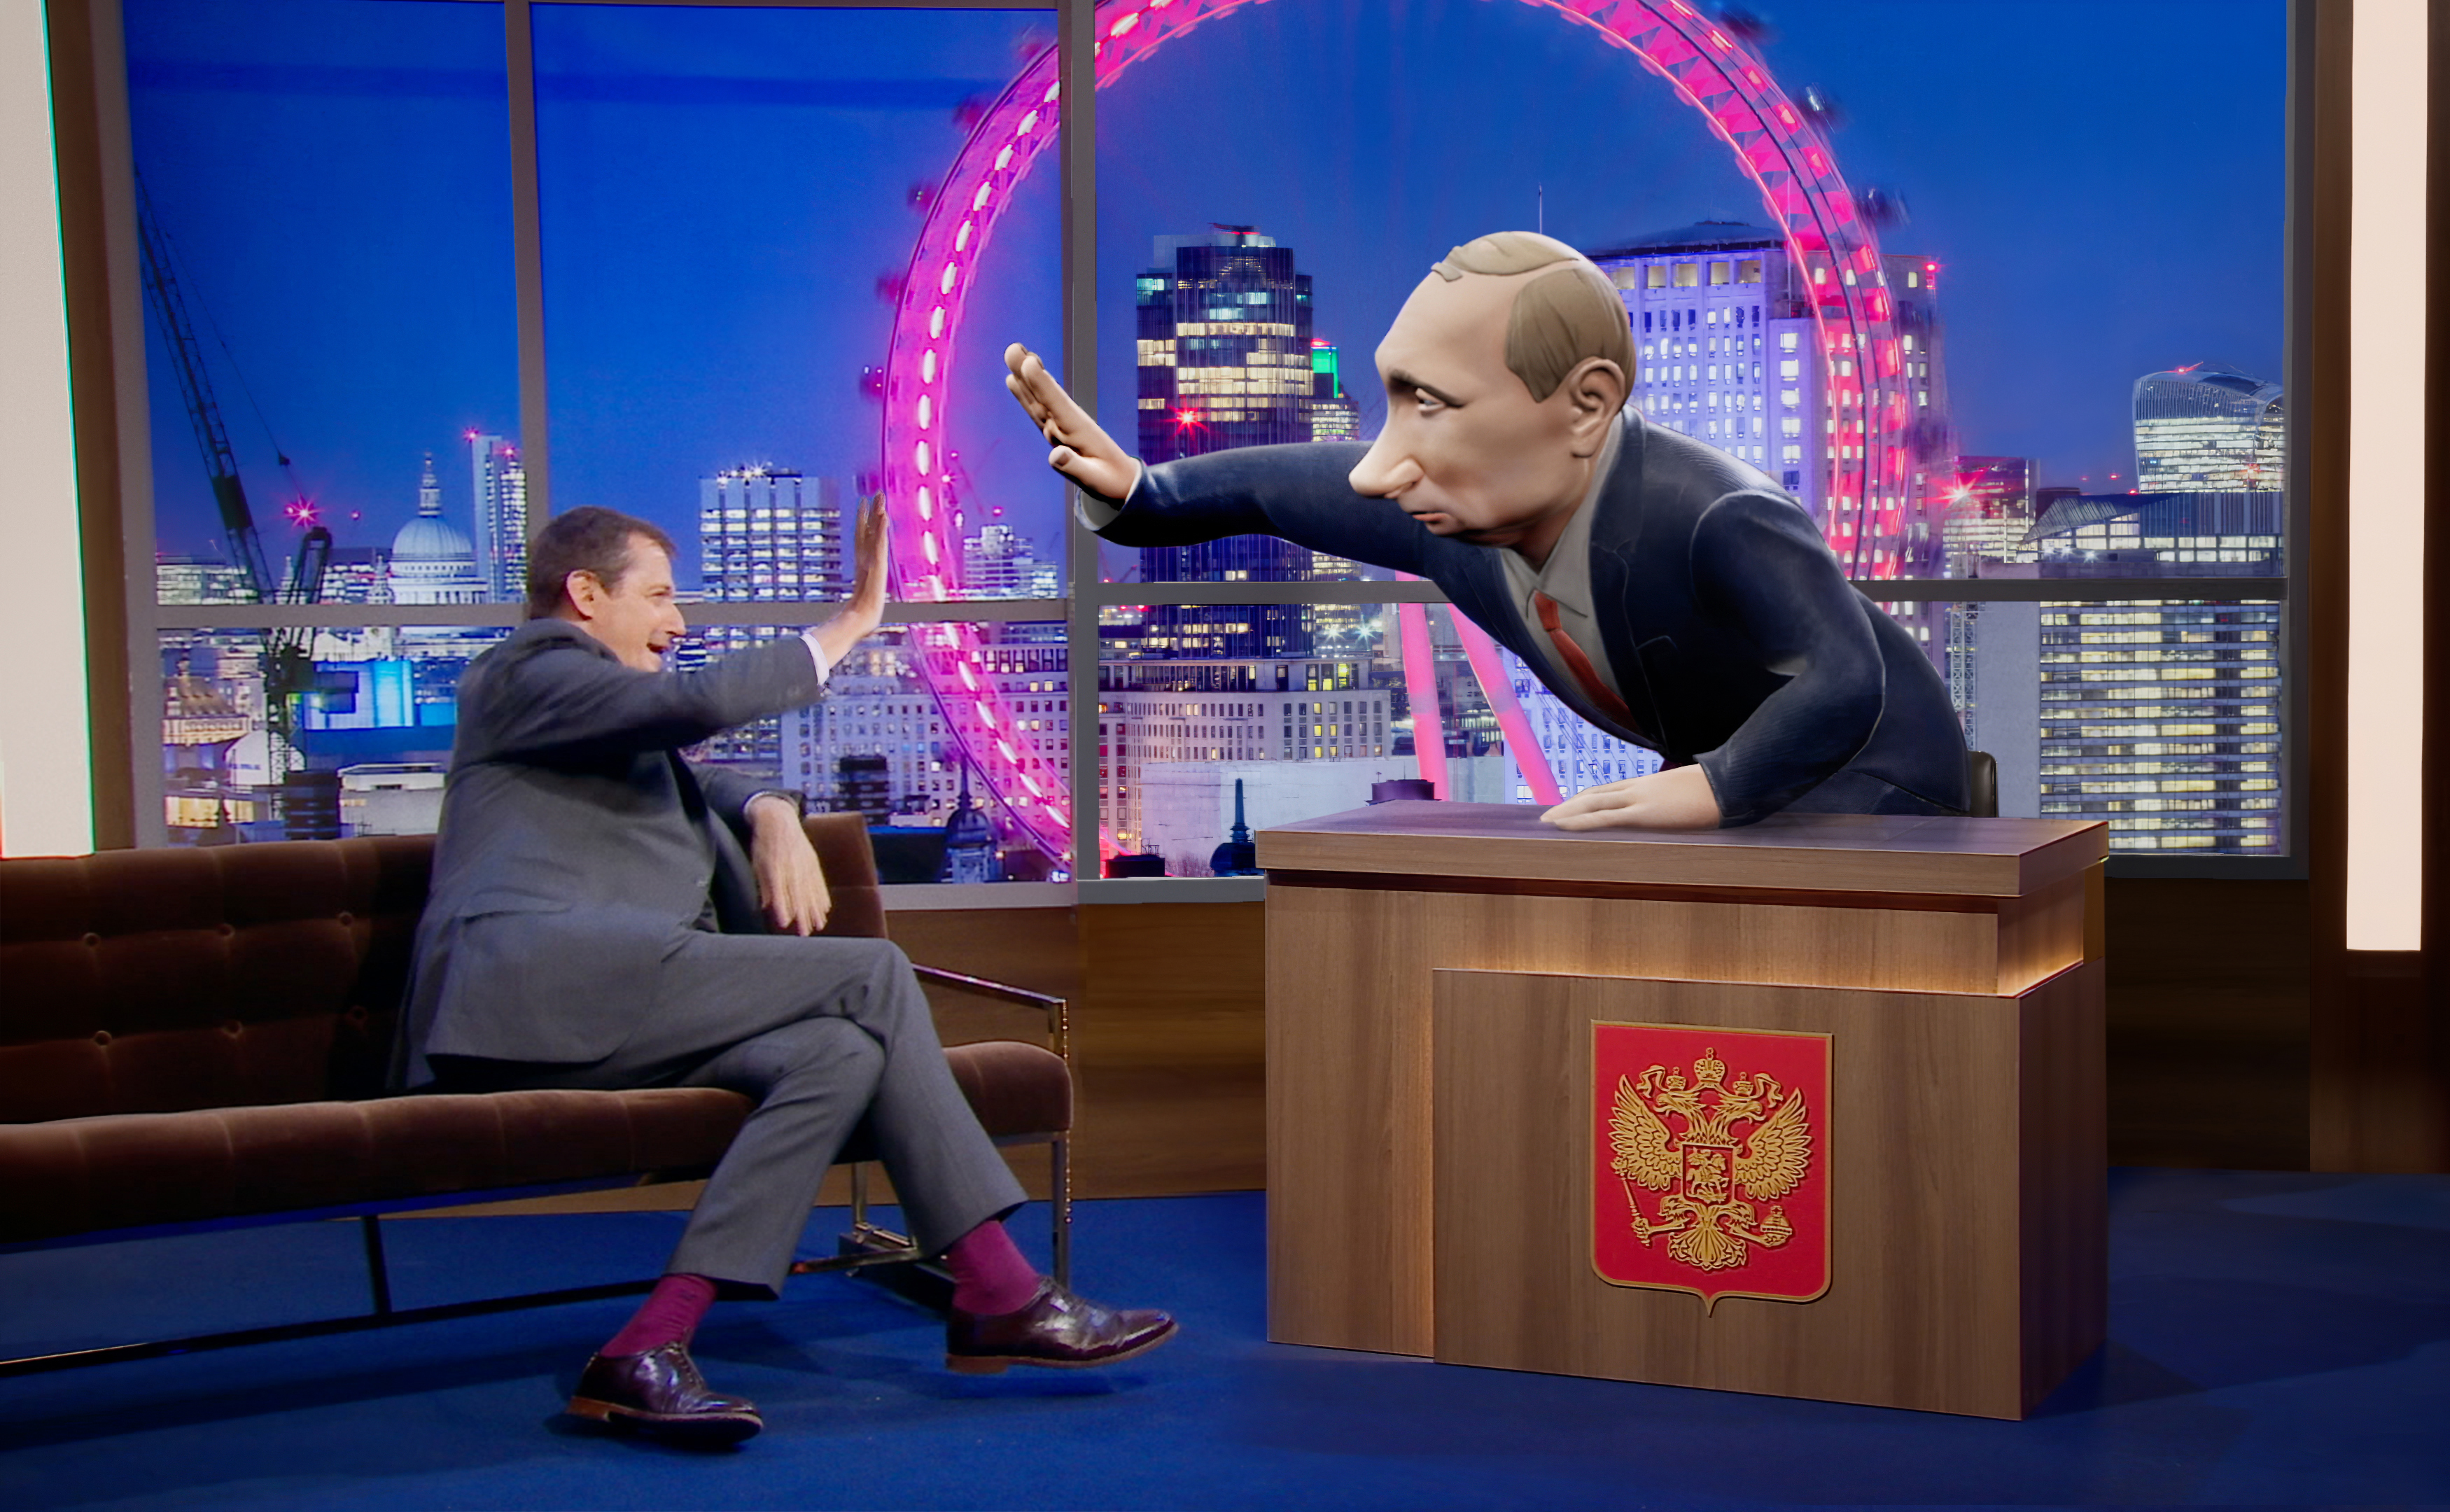 Alistair Campbell speaking to a 3D digital cartoon of Vladimir Putin, who will be the new chat show host